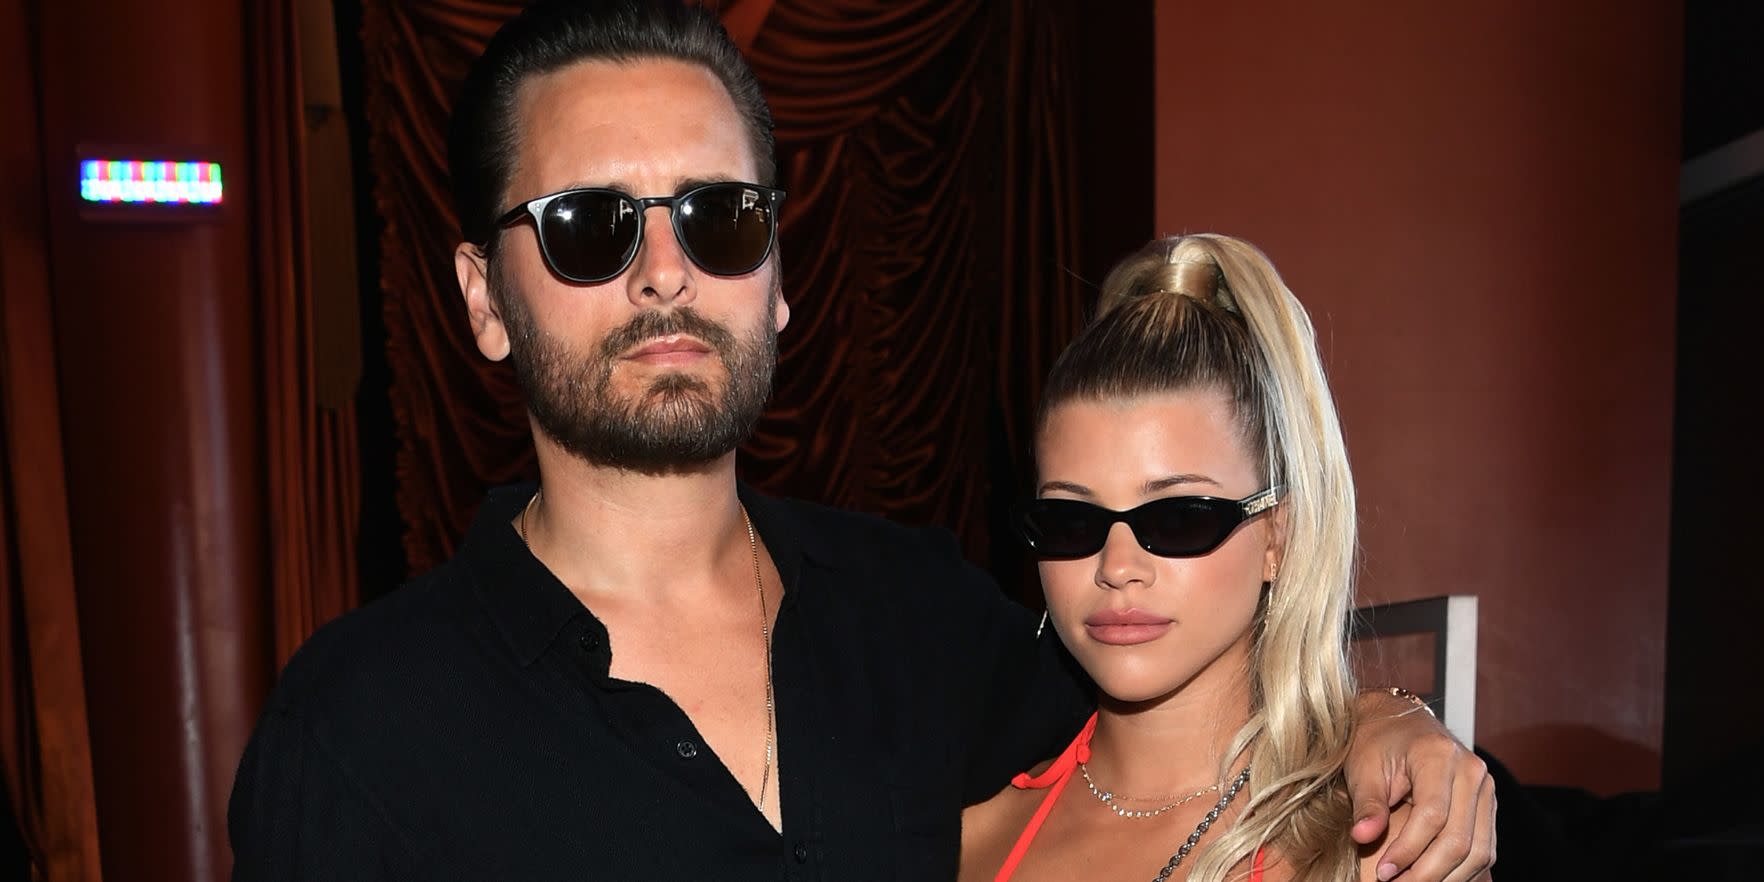 Sofia Richie apparently wants Scott Disick to keep his “relationship problems” private